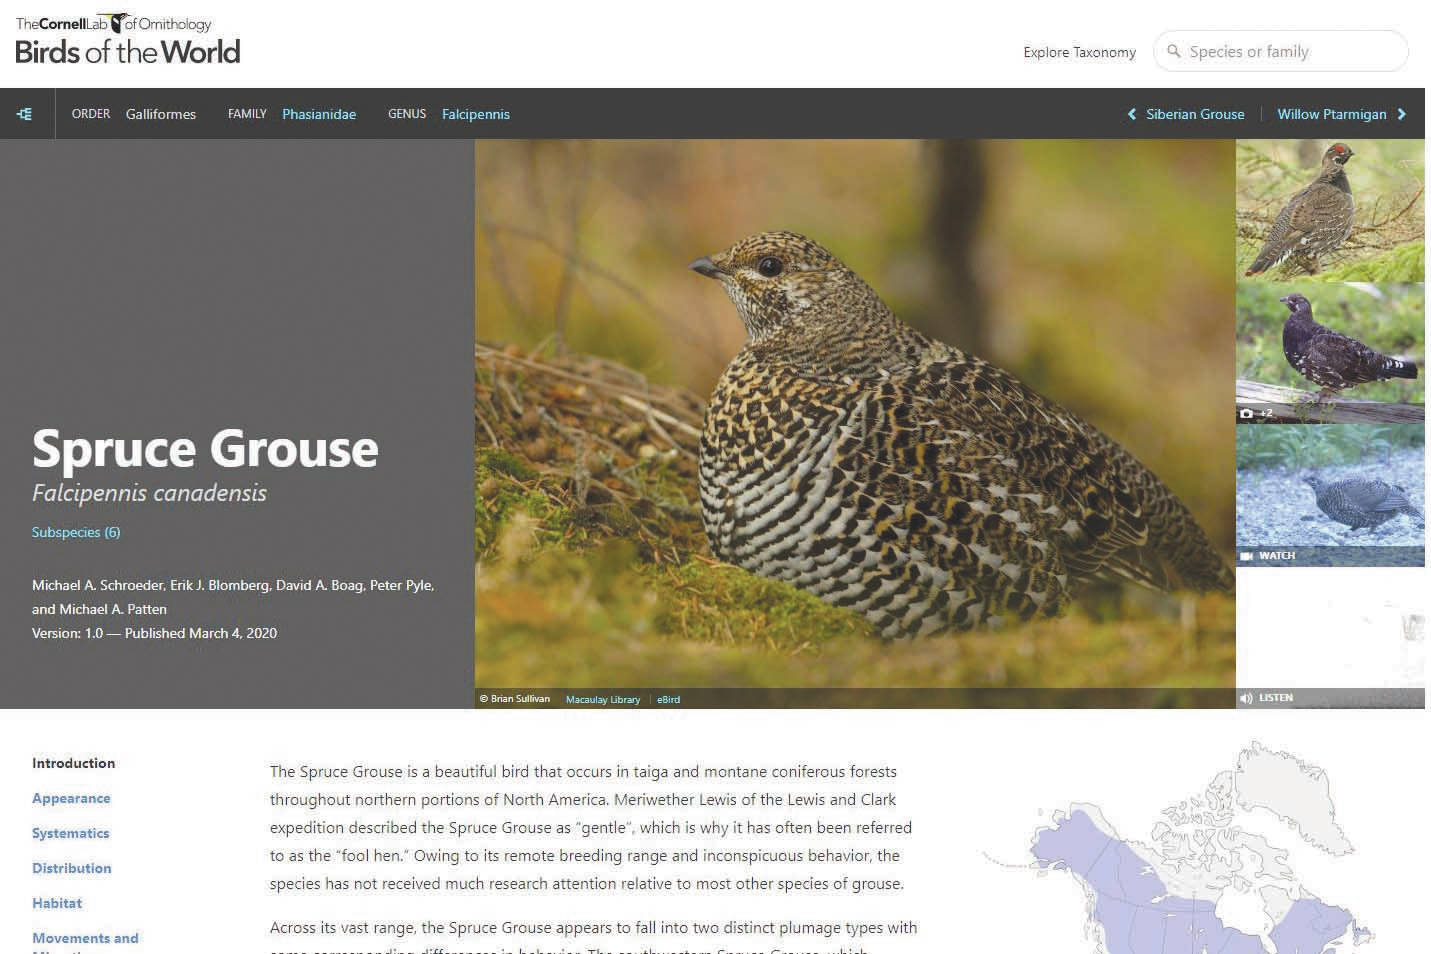 Refuge Notebook: Birds of the World resource wows